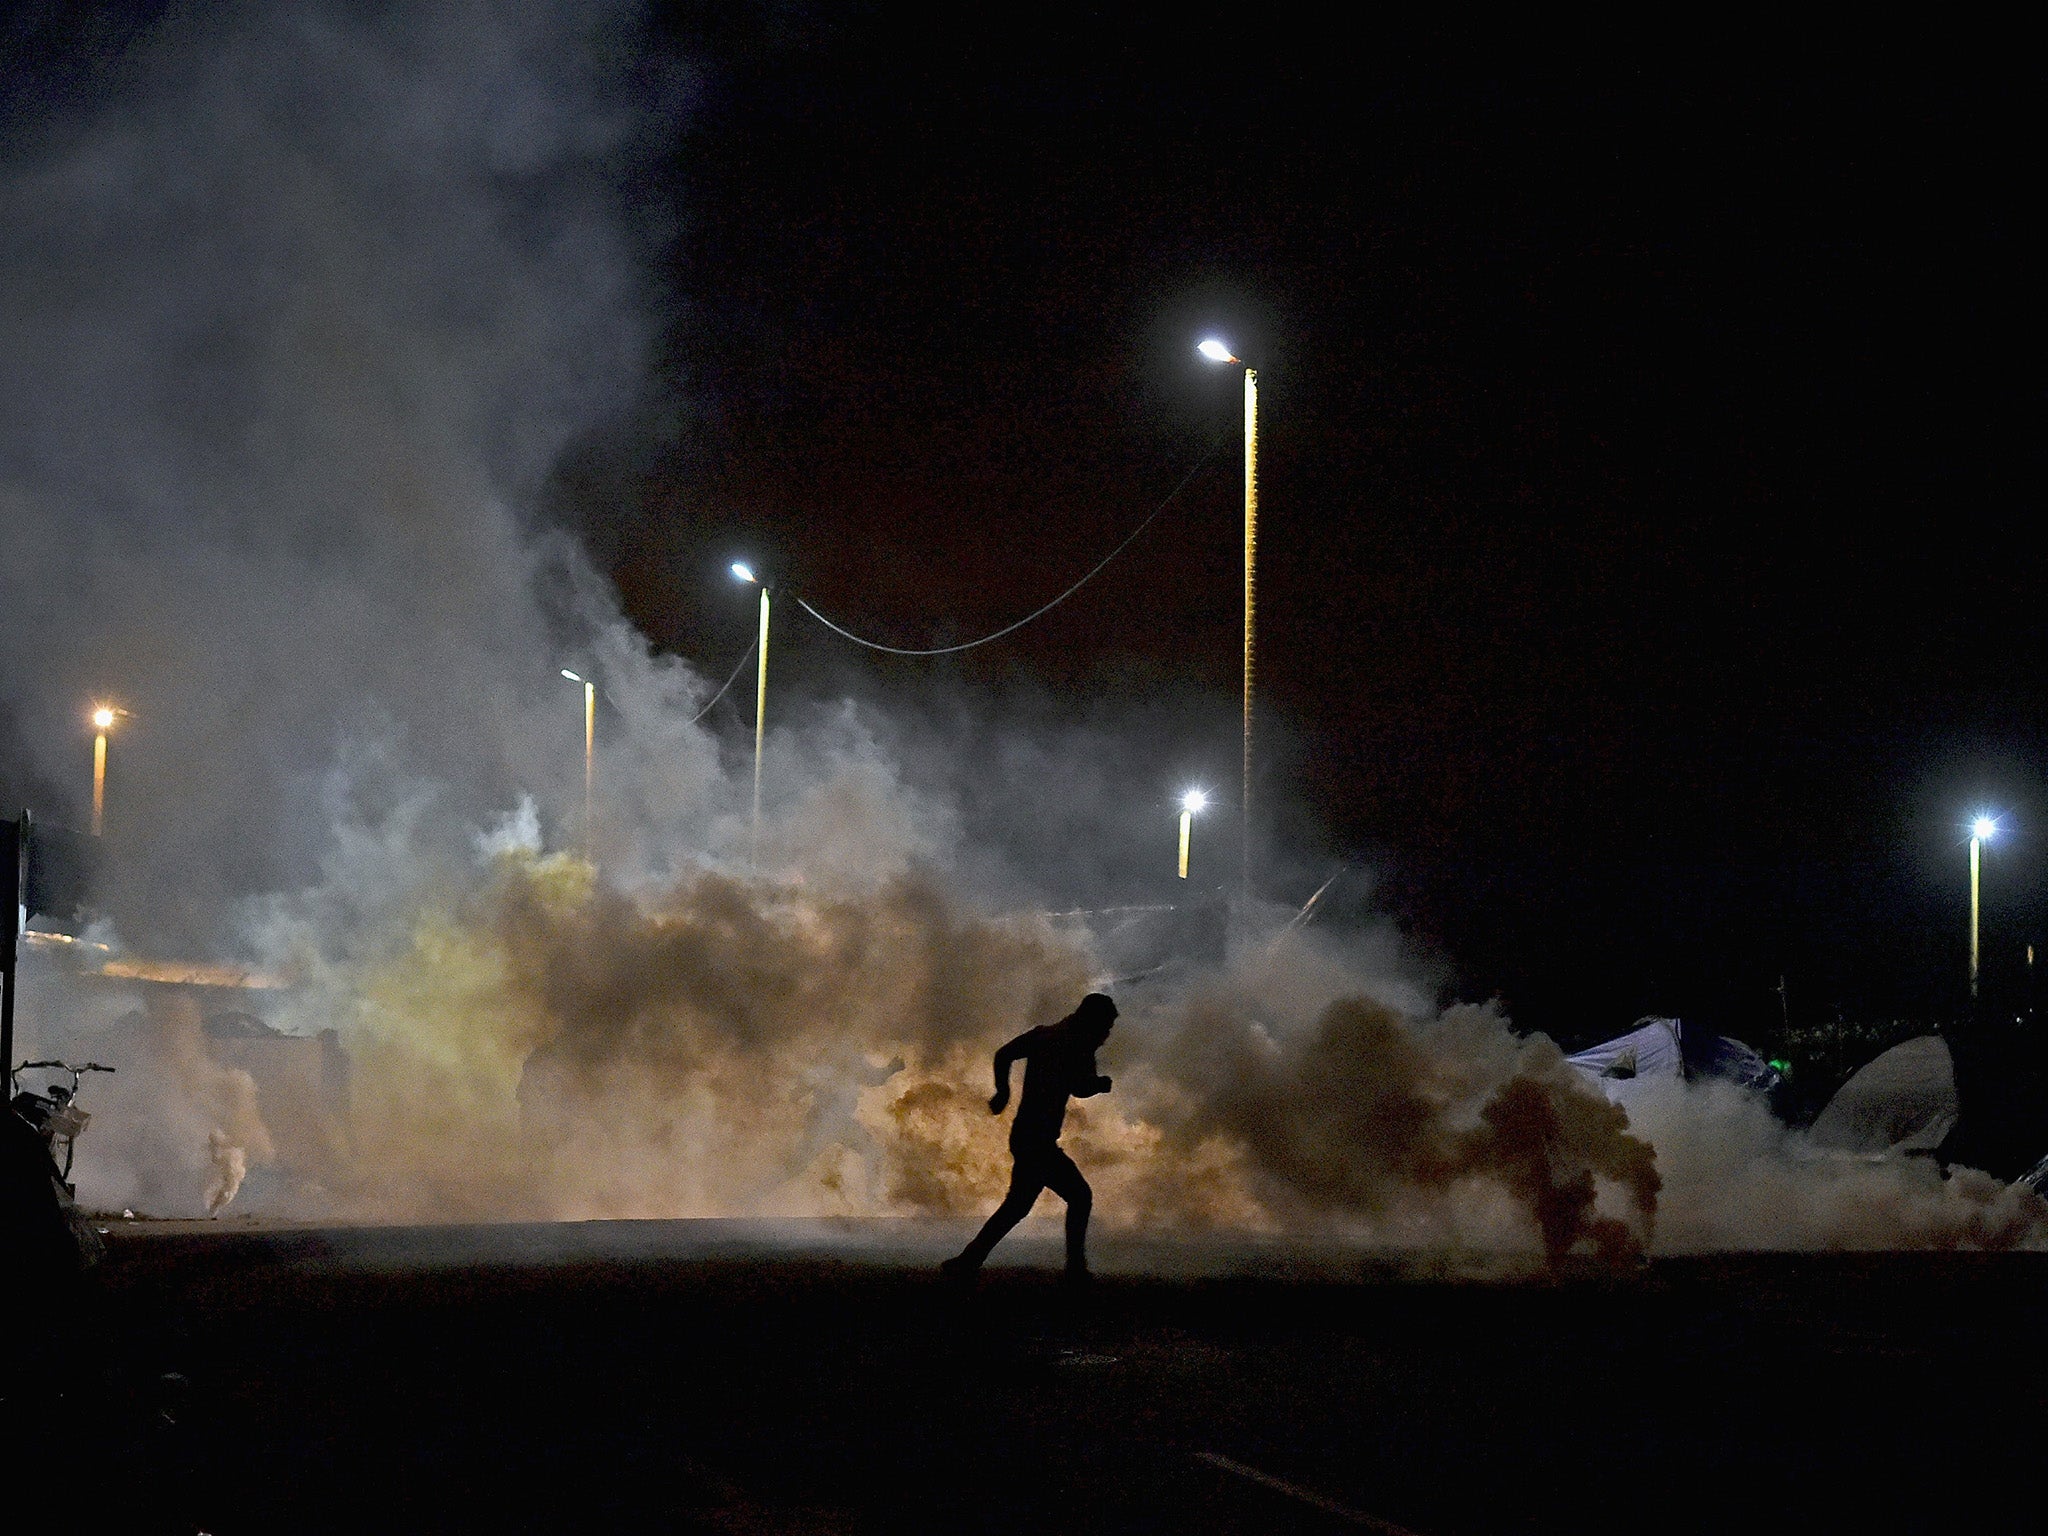 A refugee flees police tear gas near the entrance to the Jungle camp in Calais